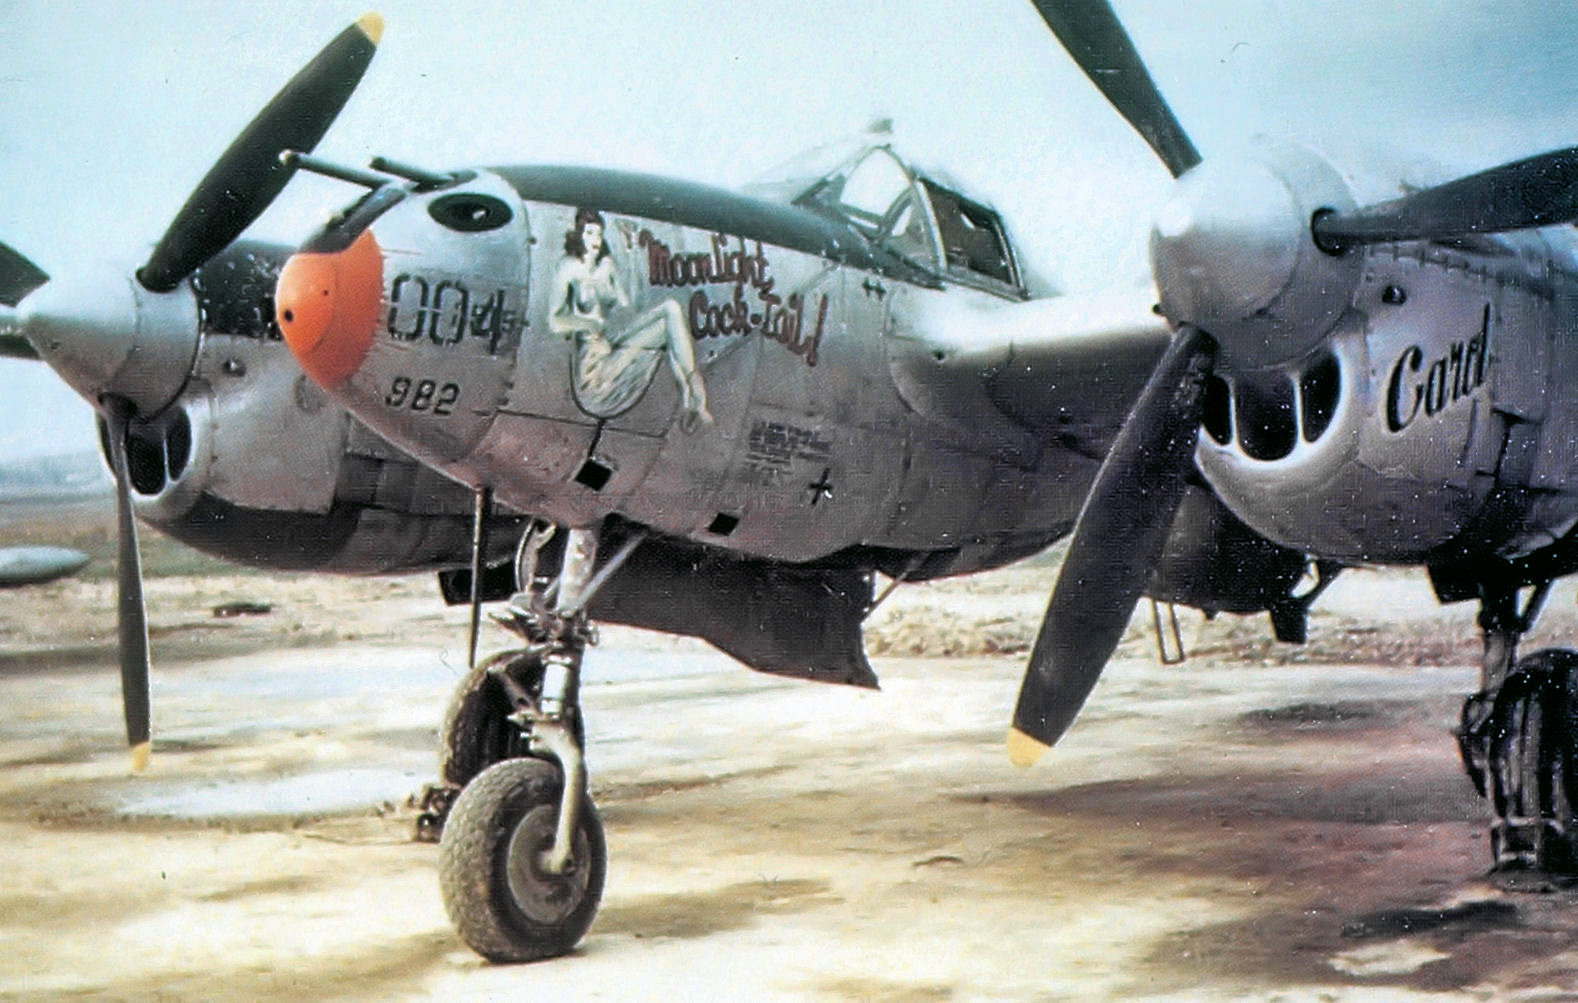 P-38J Lightning ‘Moonlight Cocktail’ of the 392nd Fighter Squadron at Juvincourt Airfield, Aisne, France, Jan 1945. Note ‘Card’ painted on the engine cowl.